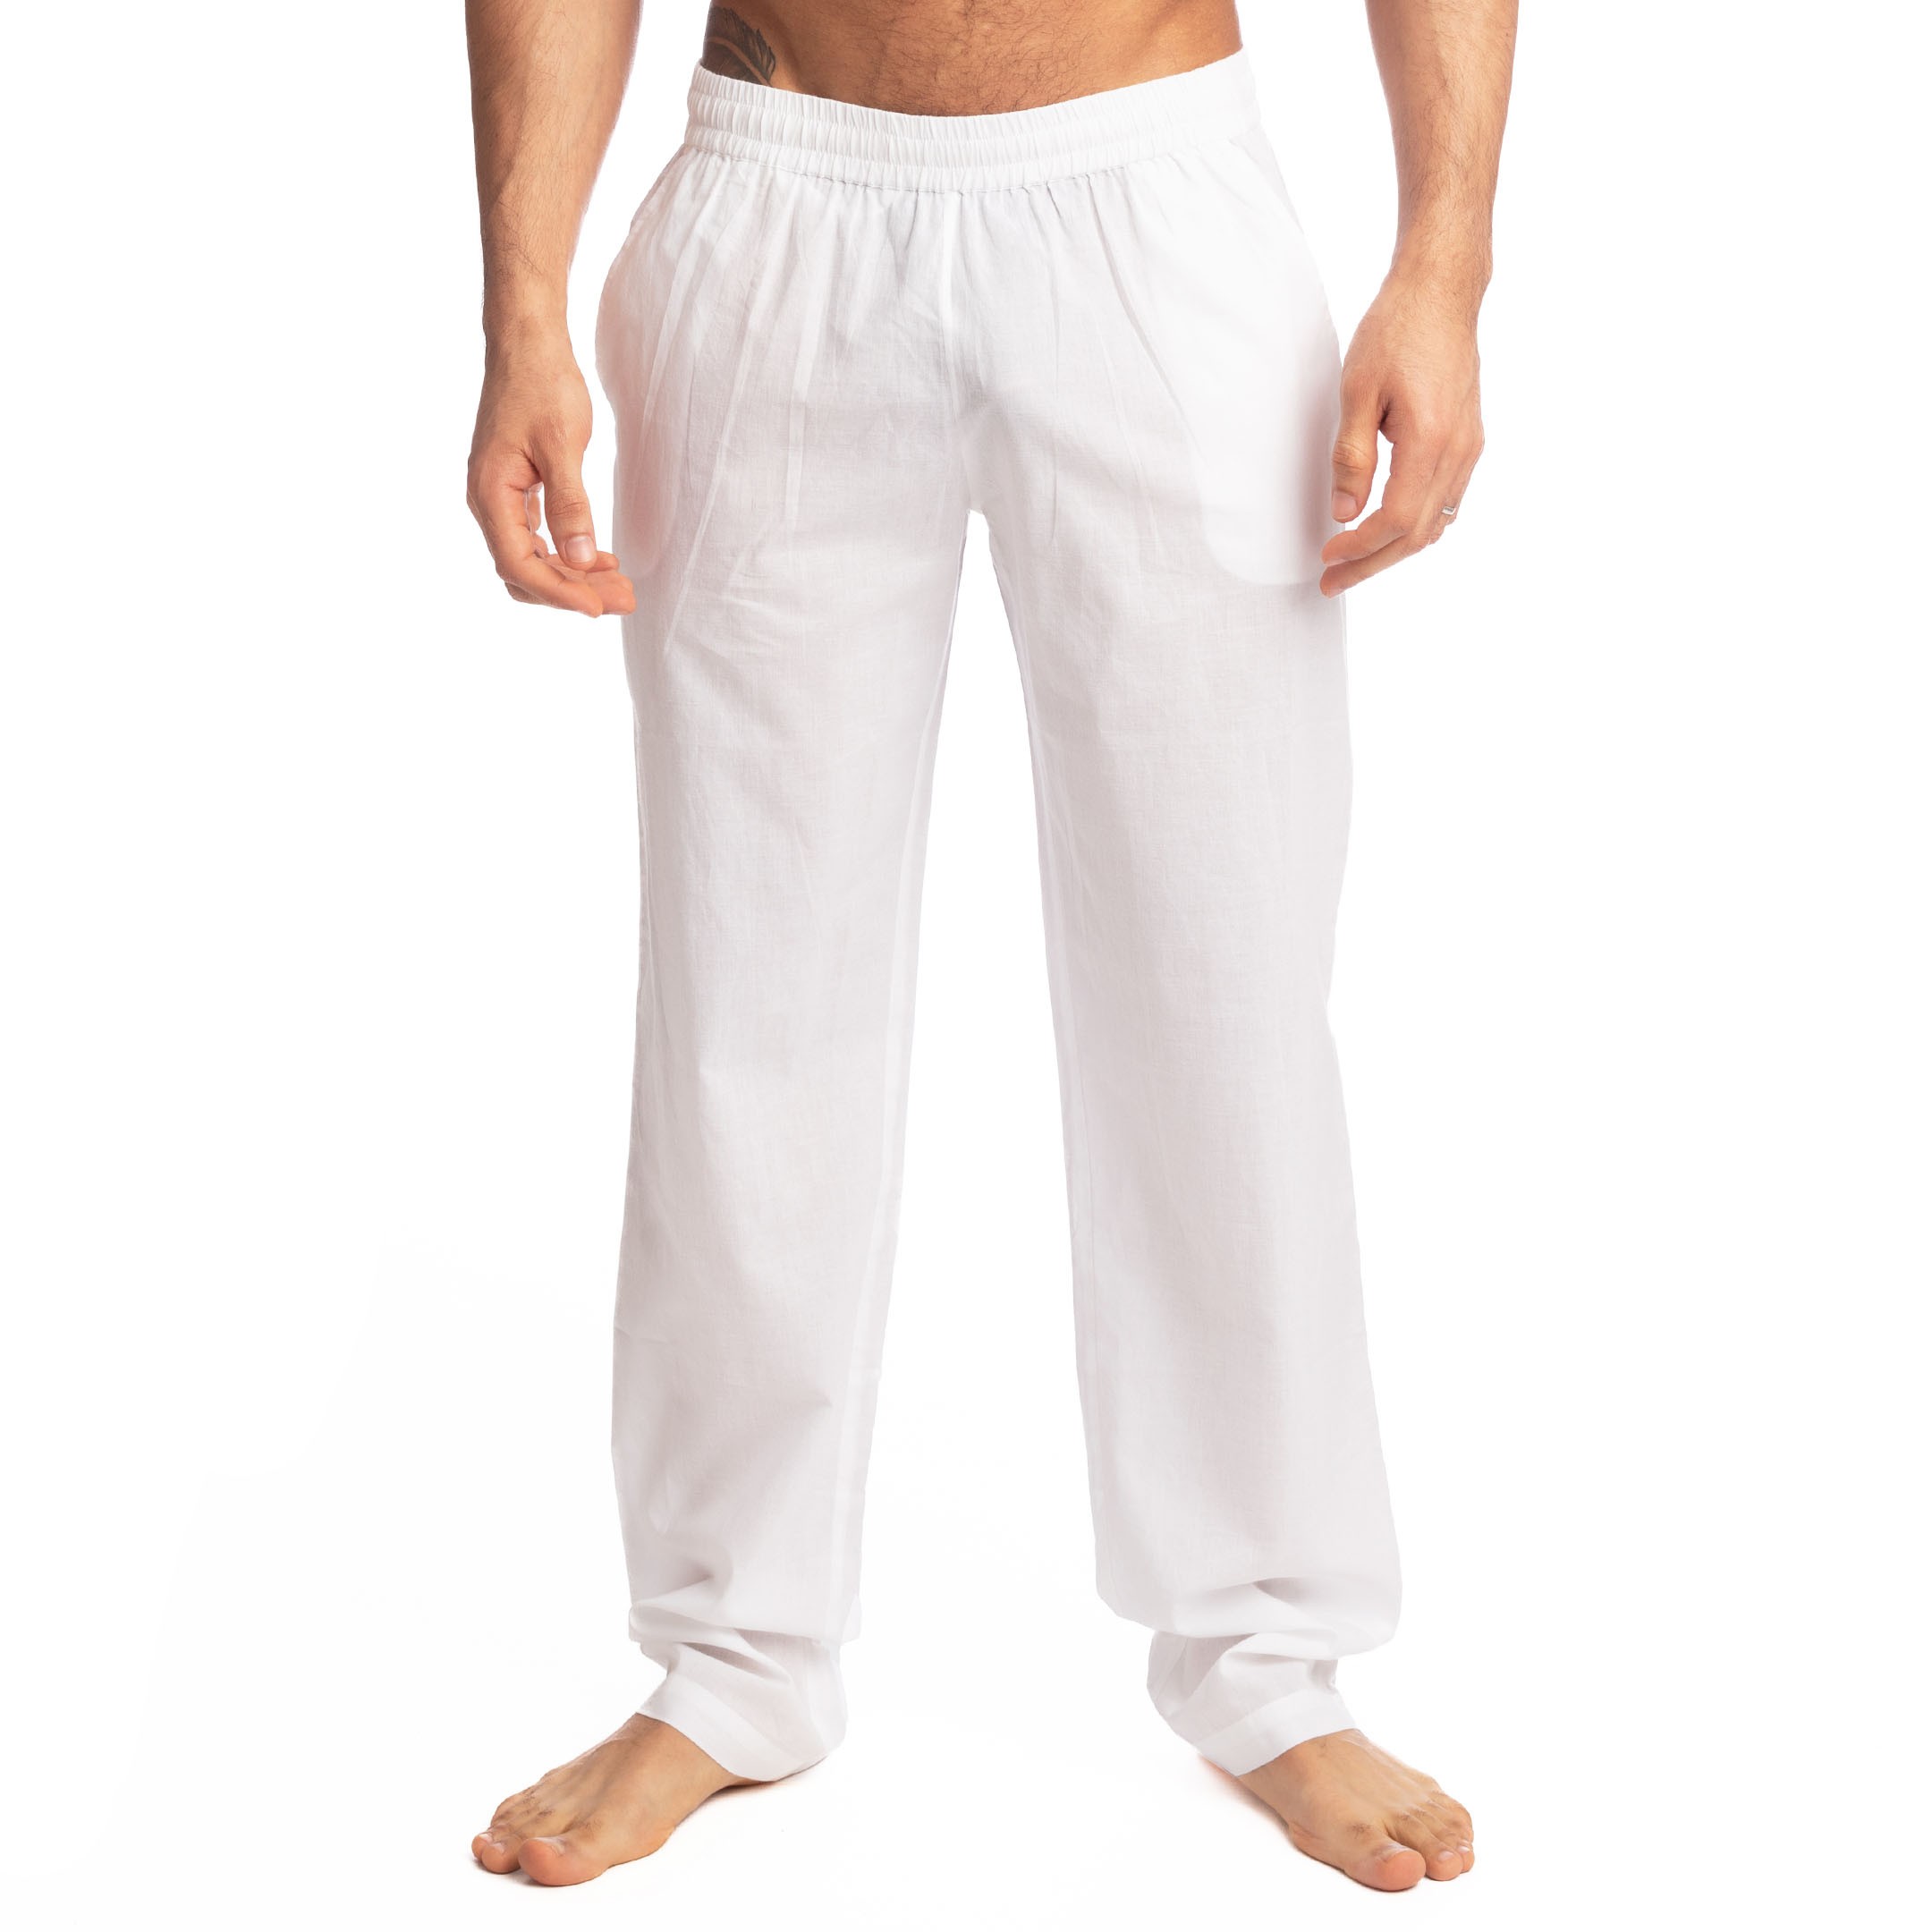 L'Homme invisible Lounge Pants - White | INDERWEAR